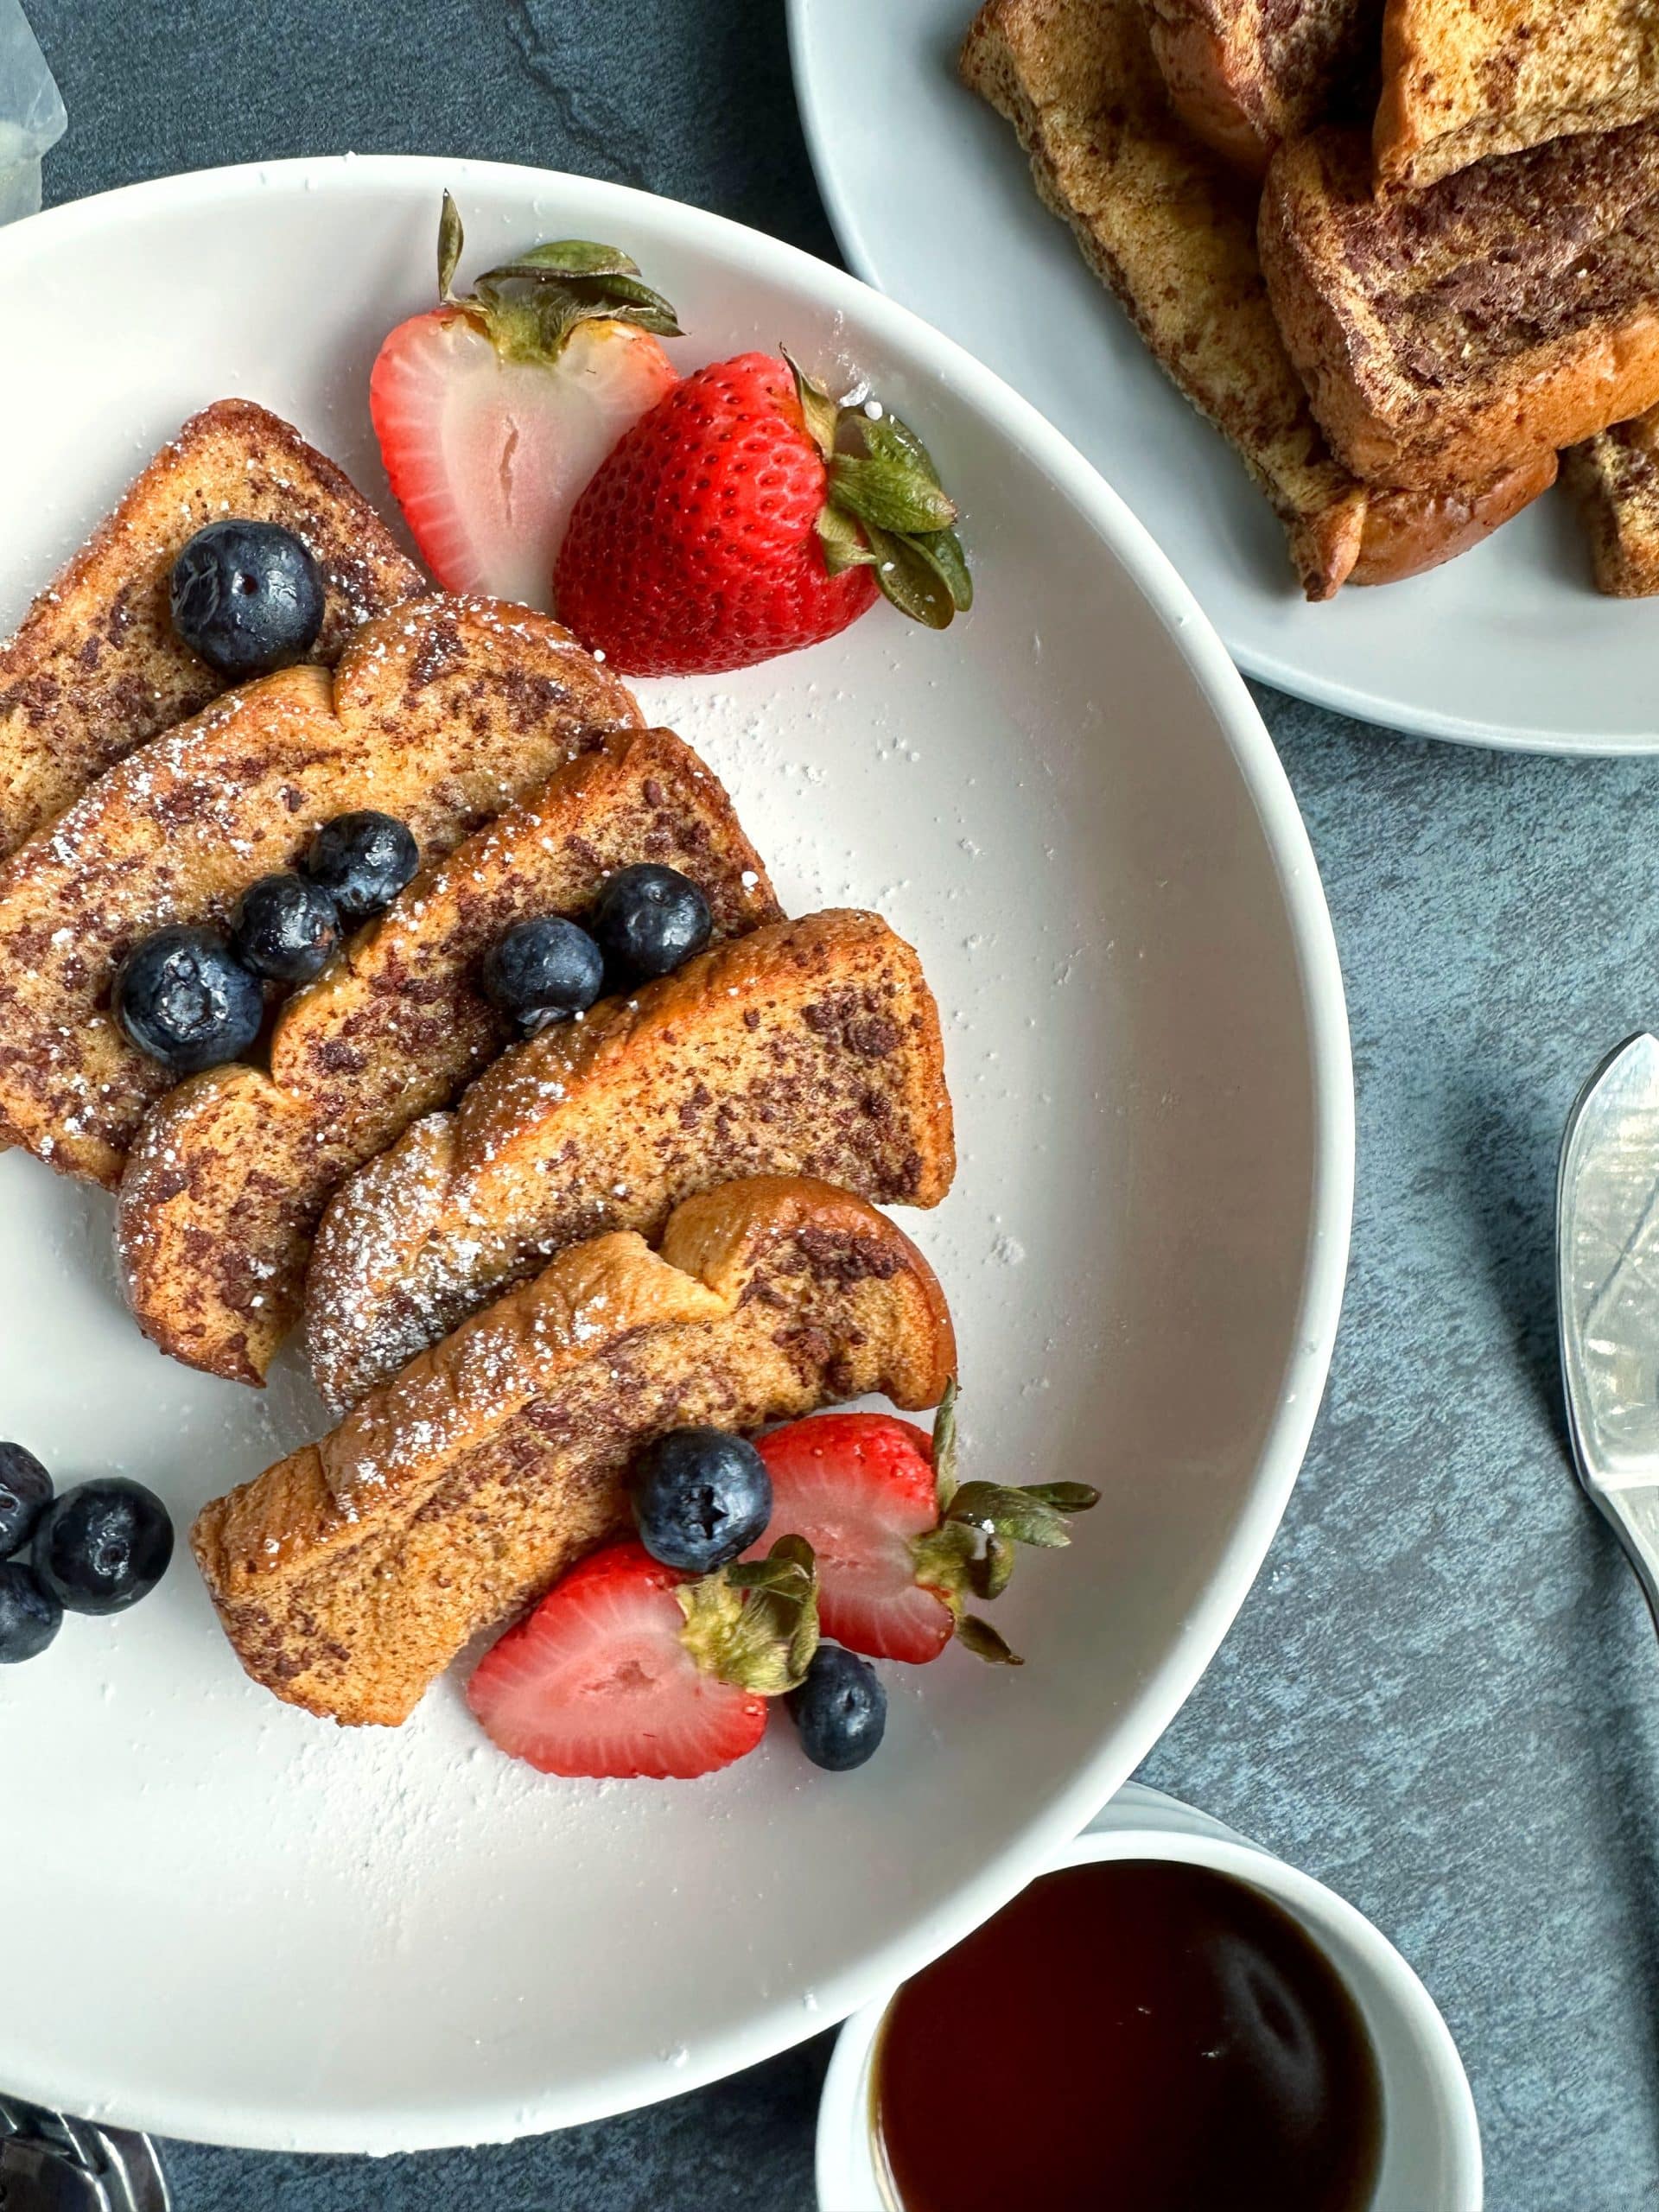 A plate of baked French toast sticks with berries and powdered sugar.